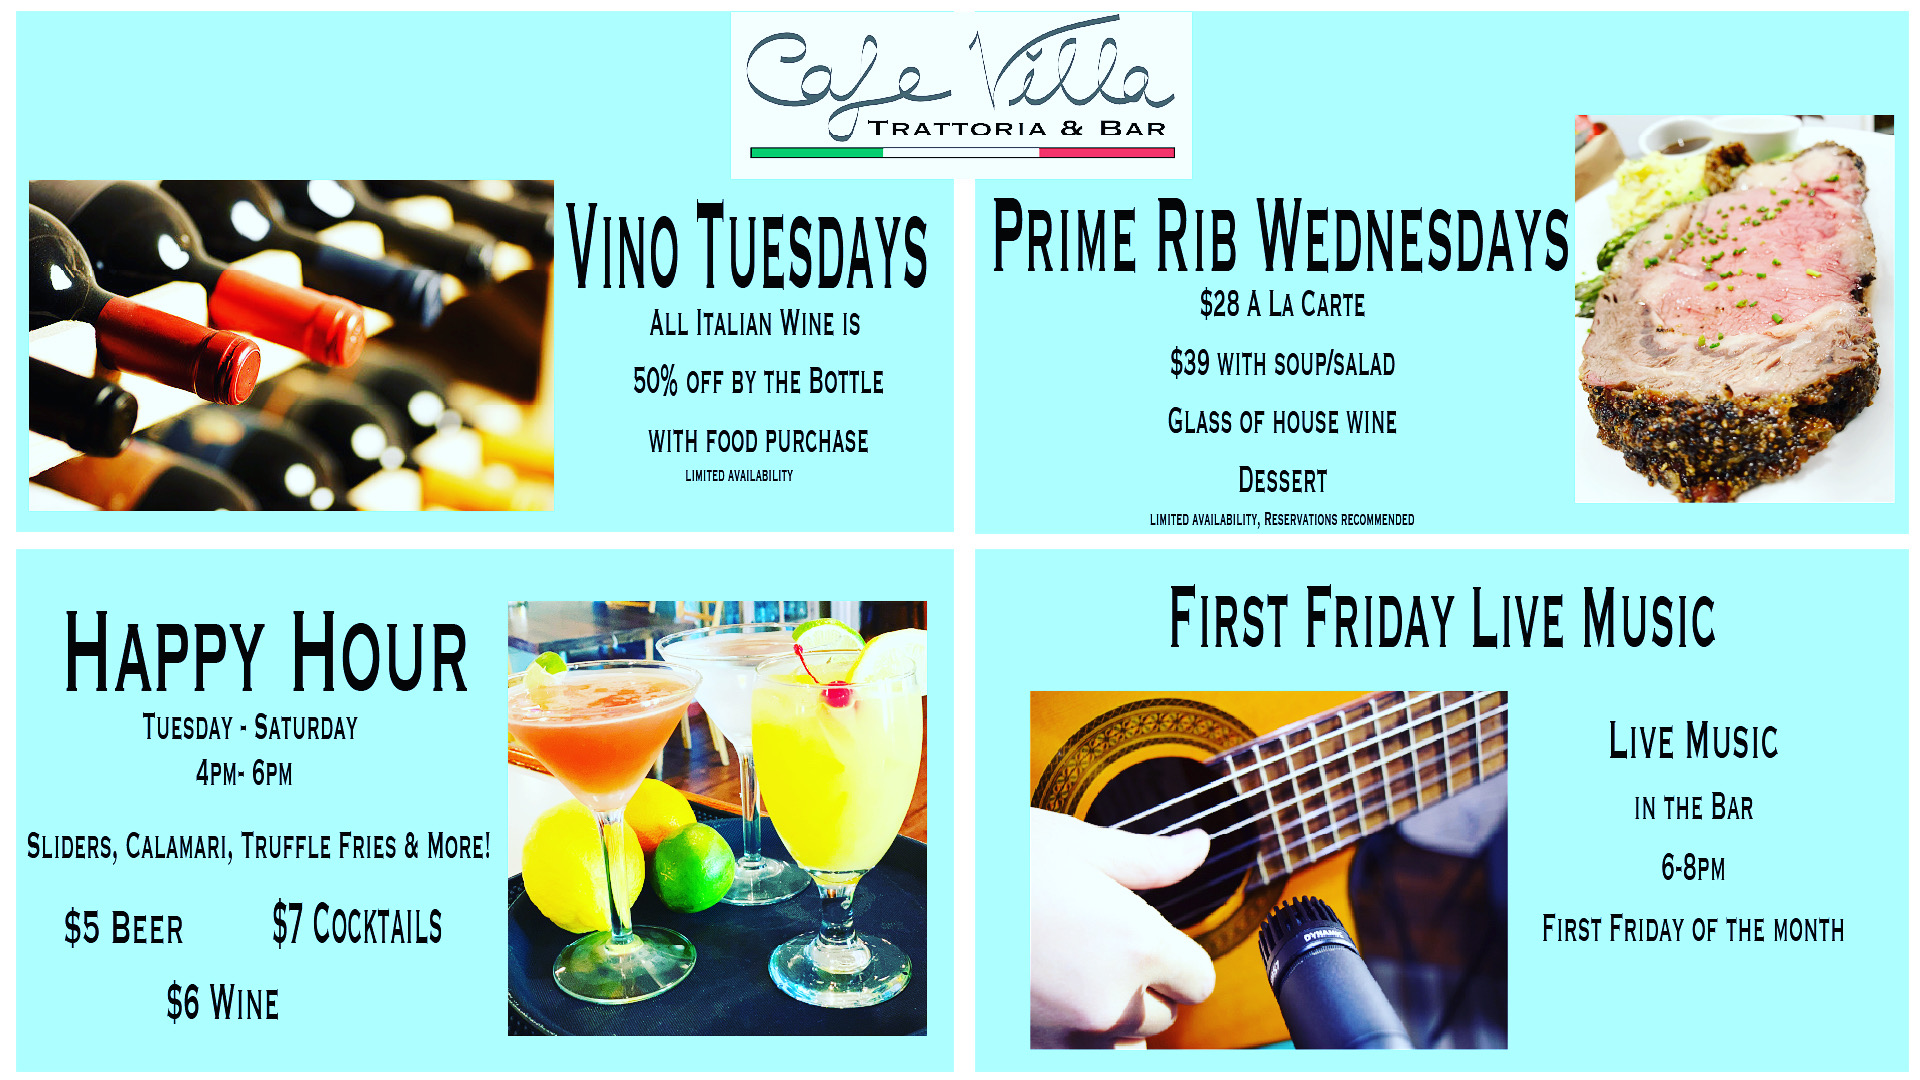 Tuesdays, Italian wine by the bottle 50%off; Prime Rib Wednesdays; Happy Hour 4-6pm Tues-Sat; First Fridays music in the bar 6-8pm